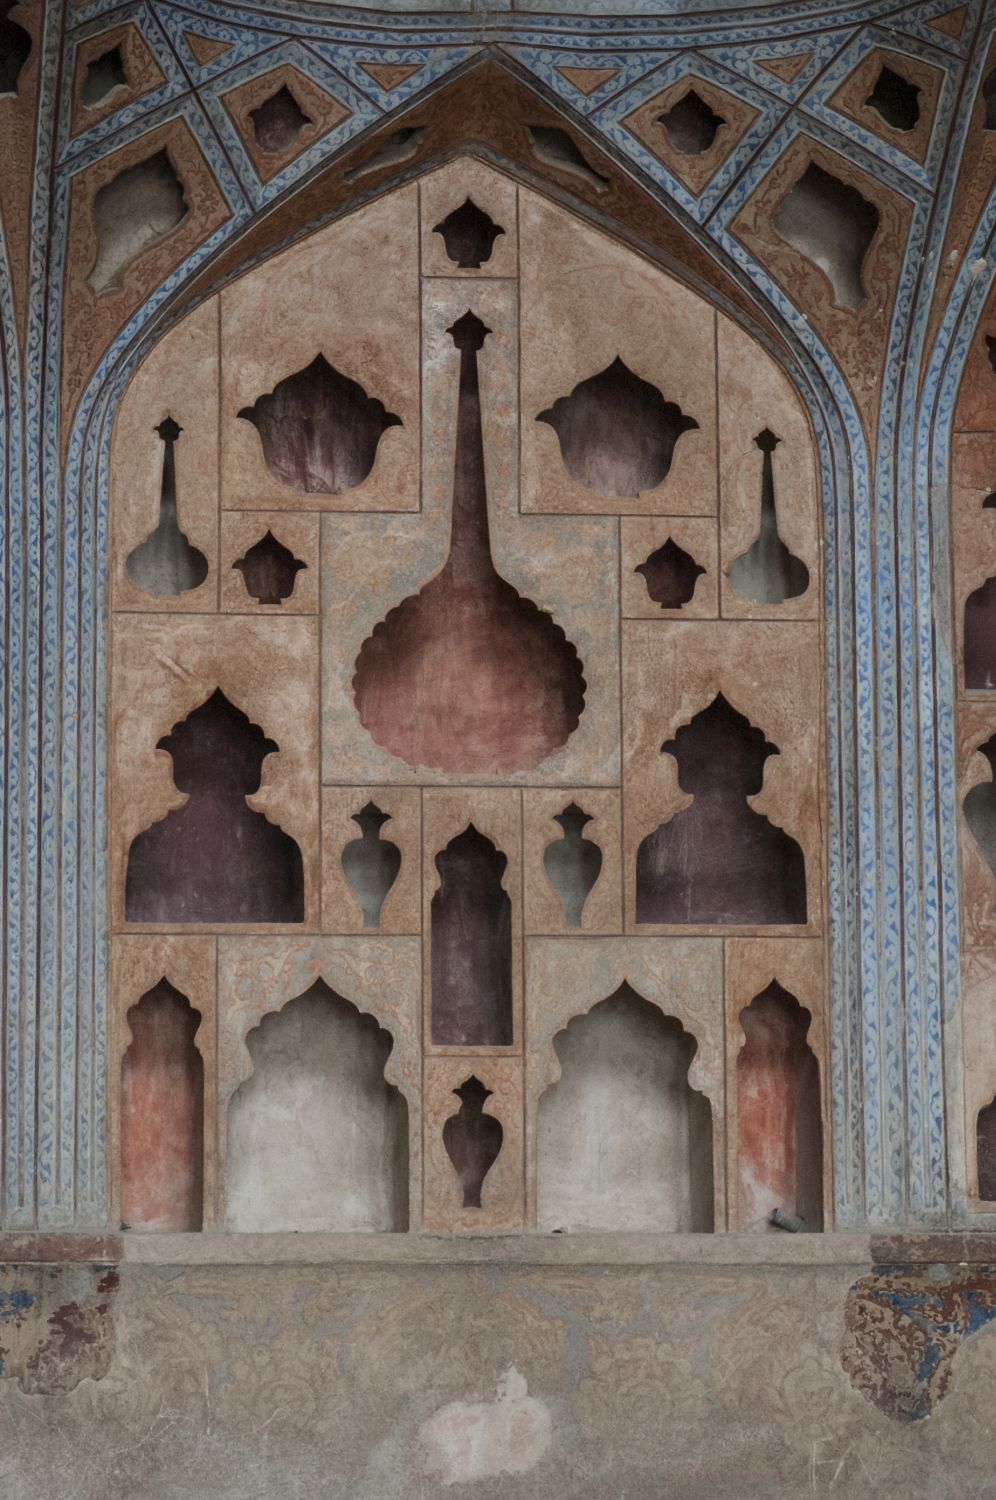 Fifth floor "music room," detail view of muqarnas vaults with perforations in shape of vessels and instruments.